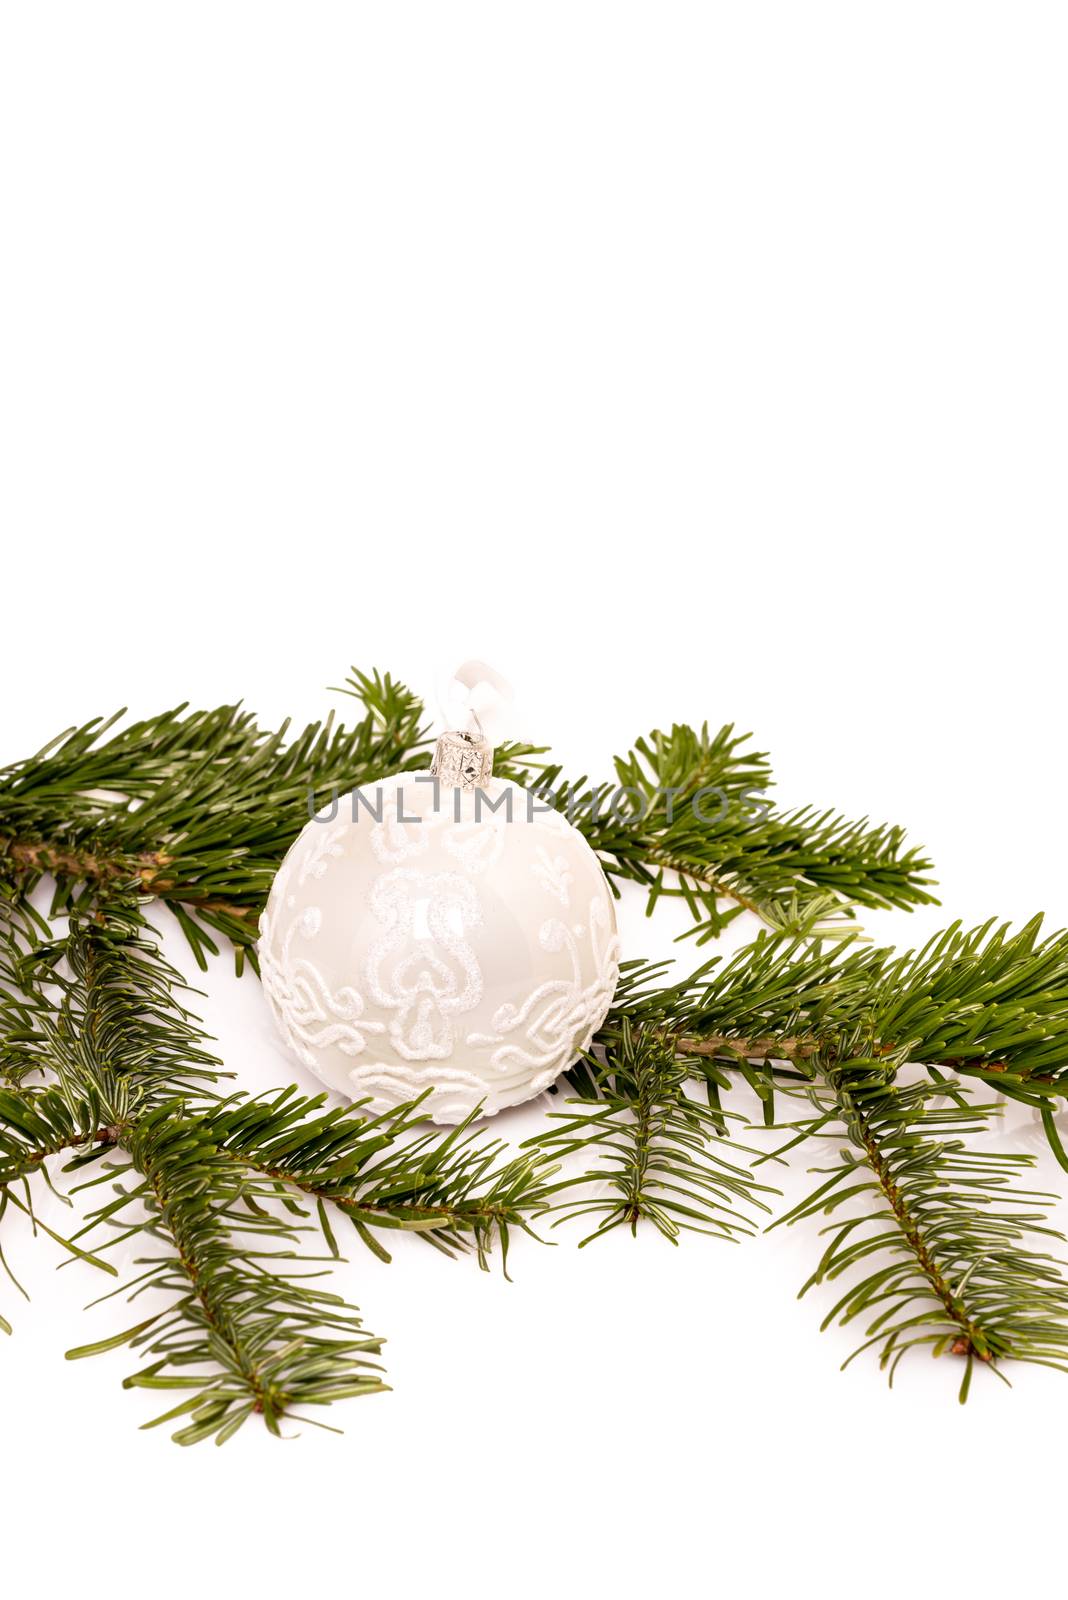 Christmas ball and fir branch for your text by franky242